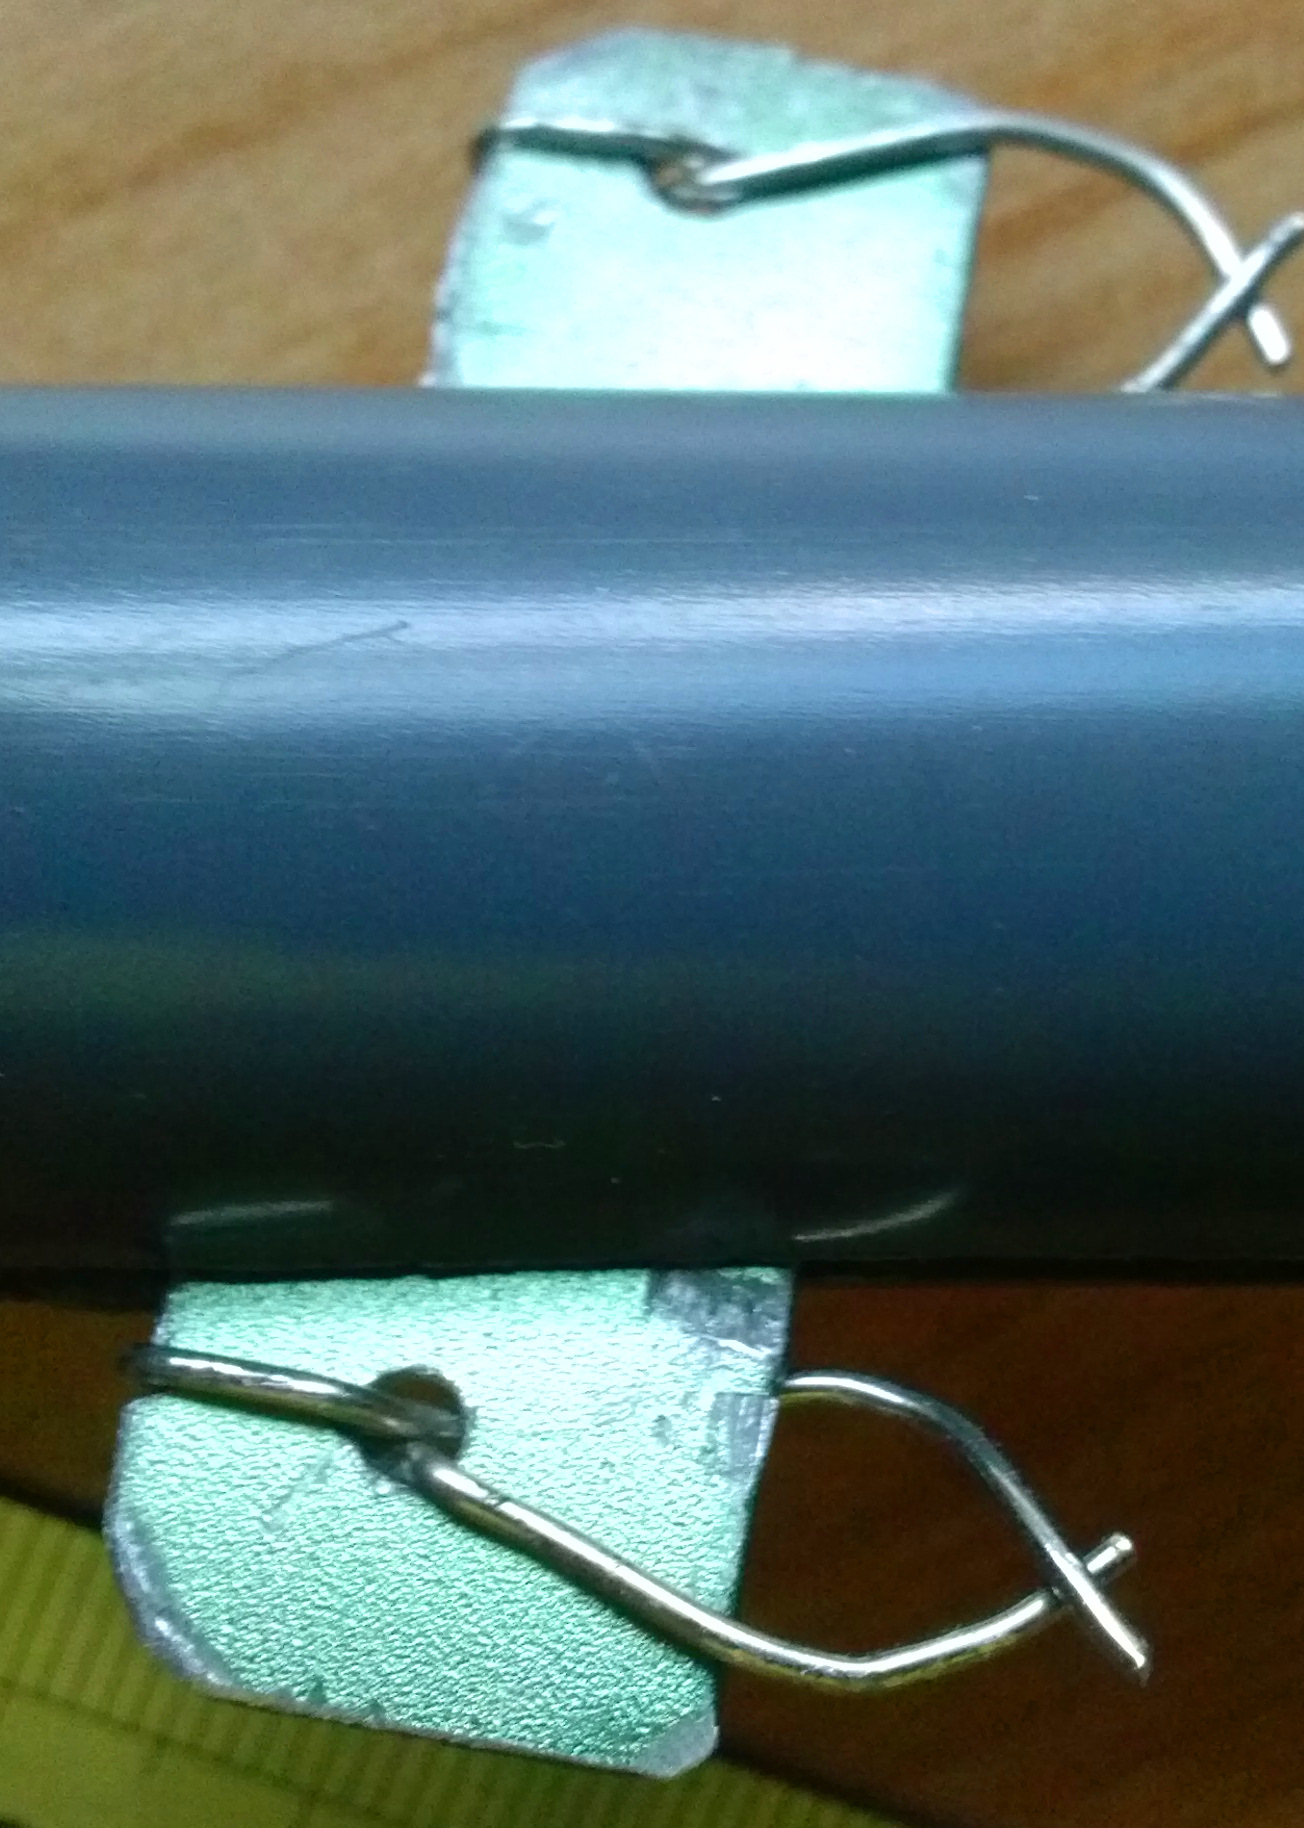 Moving assembly inserted into the PVC pipe